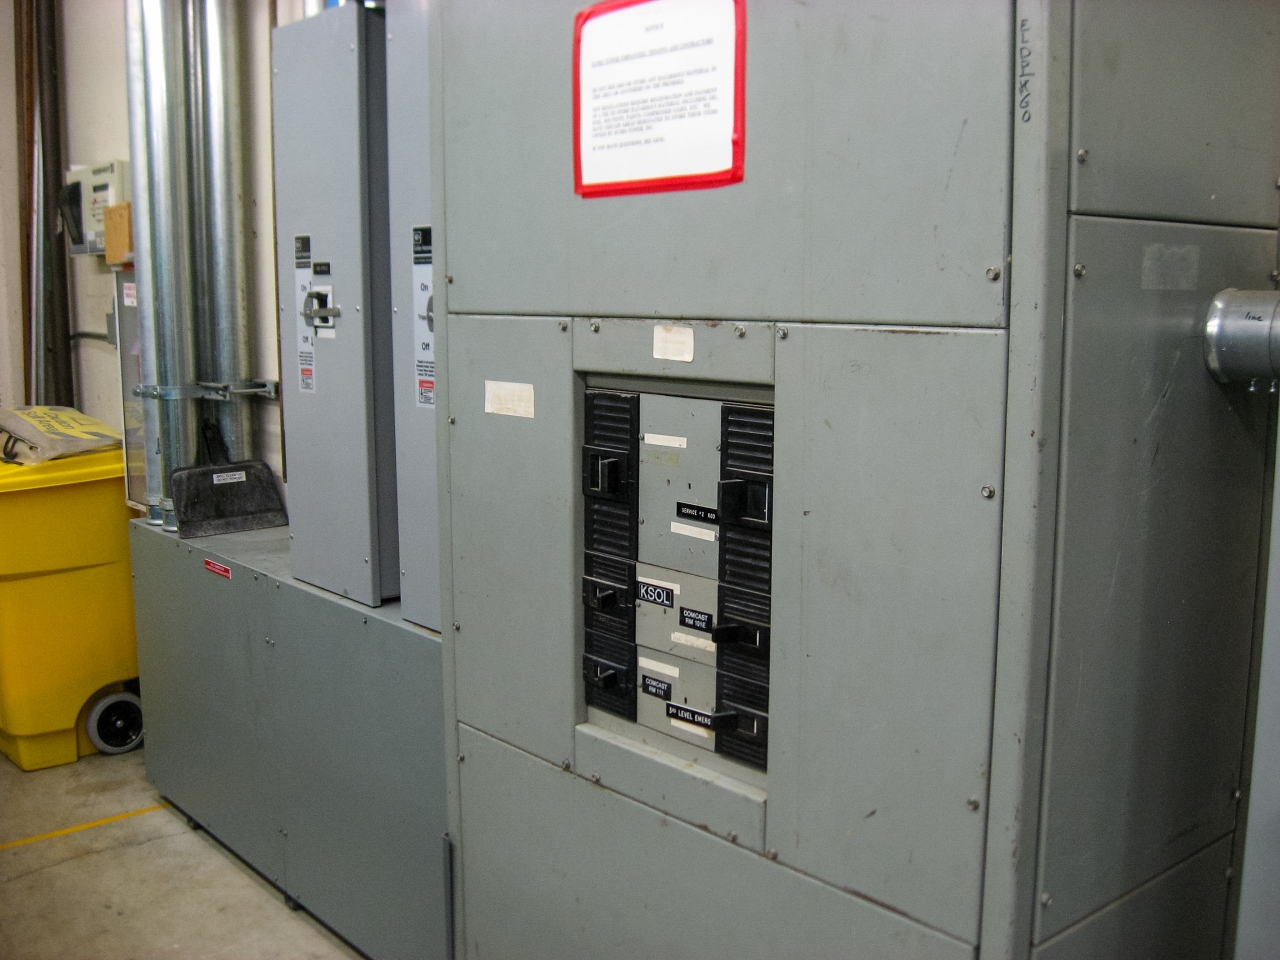 Humongous circuit breaker switches for various rooms and systems at Sutro Tower.